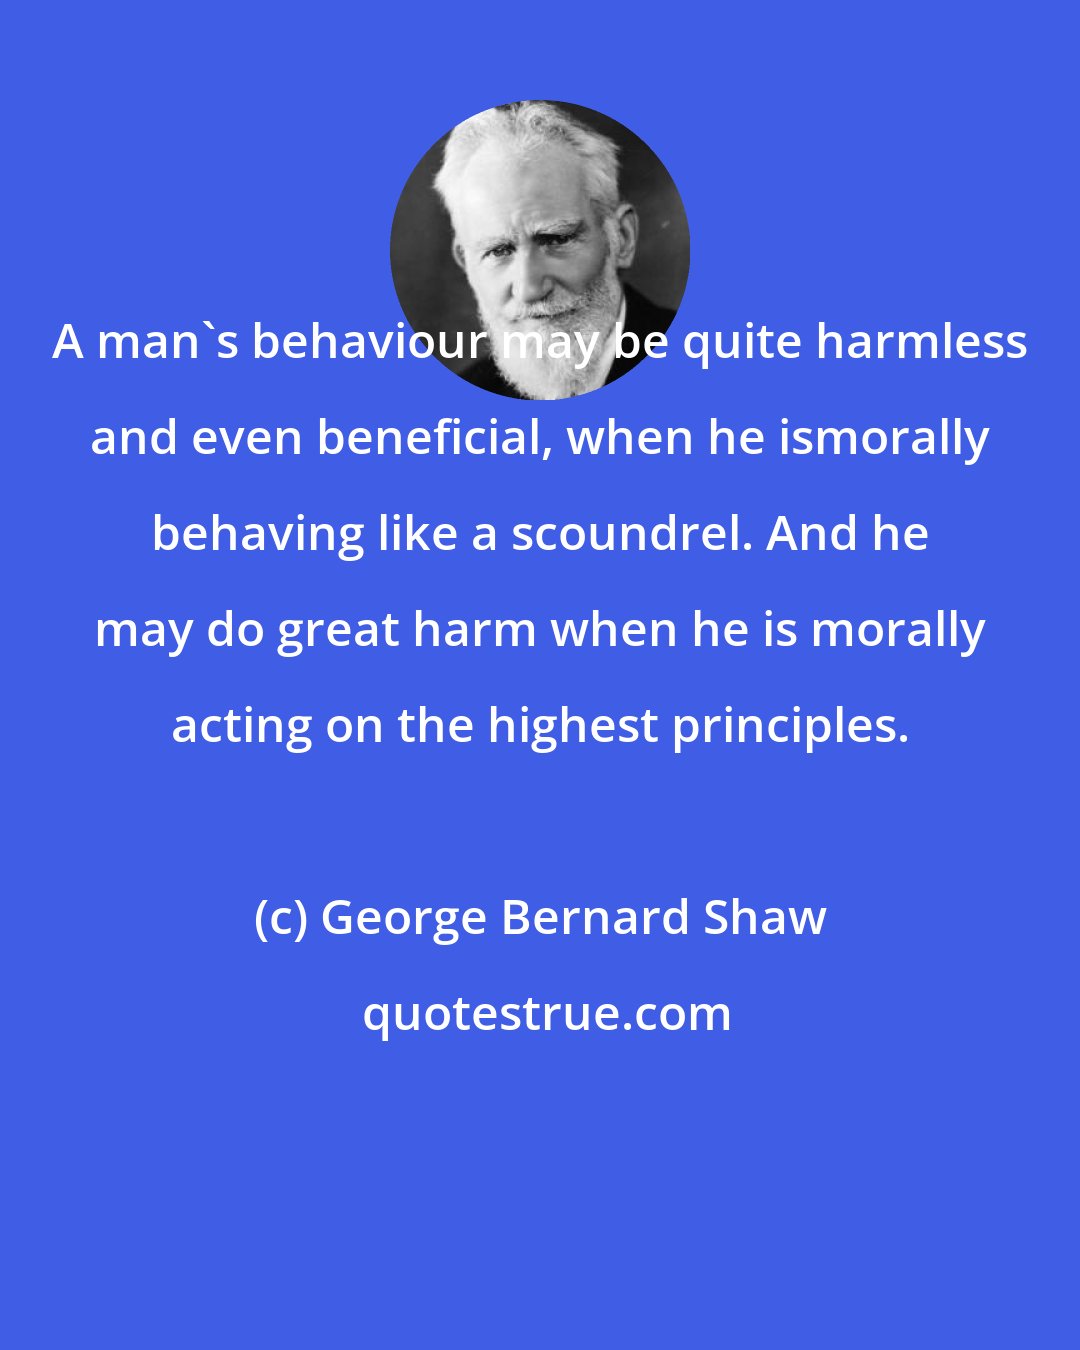 George Bernard Shaw: A man's behaviour may be quite harmless and even beneficial, when he ismorally behaving like a scoundrel. And he may do great harm when he is morally acting on the highest principles.